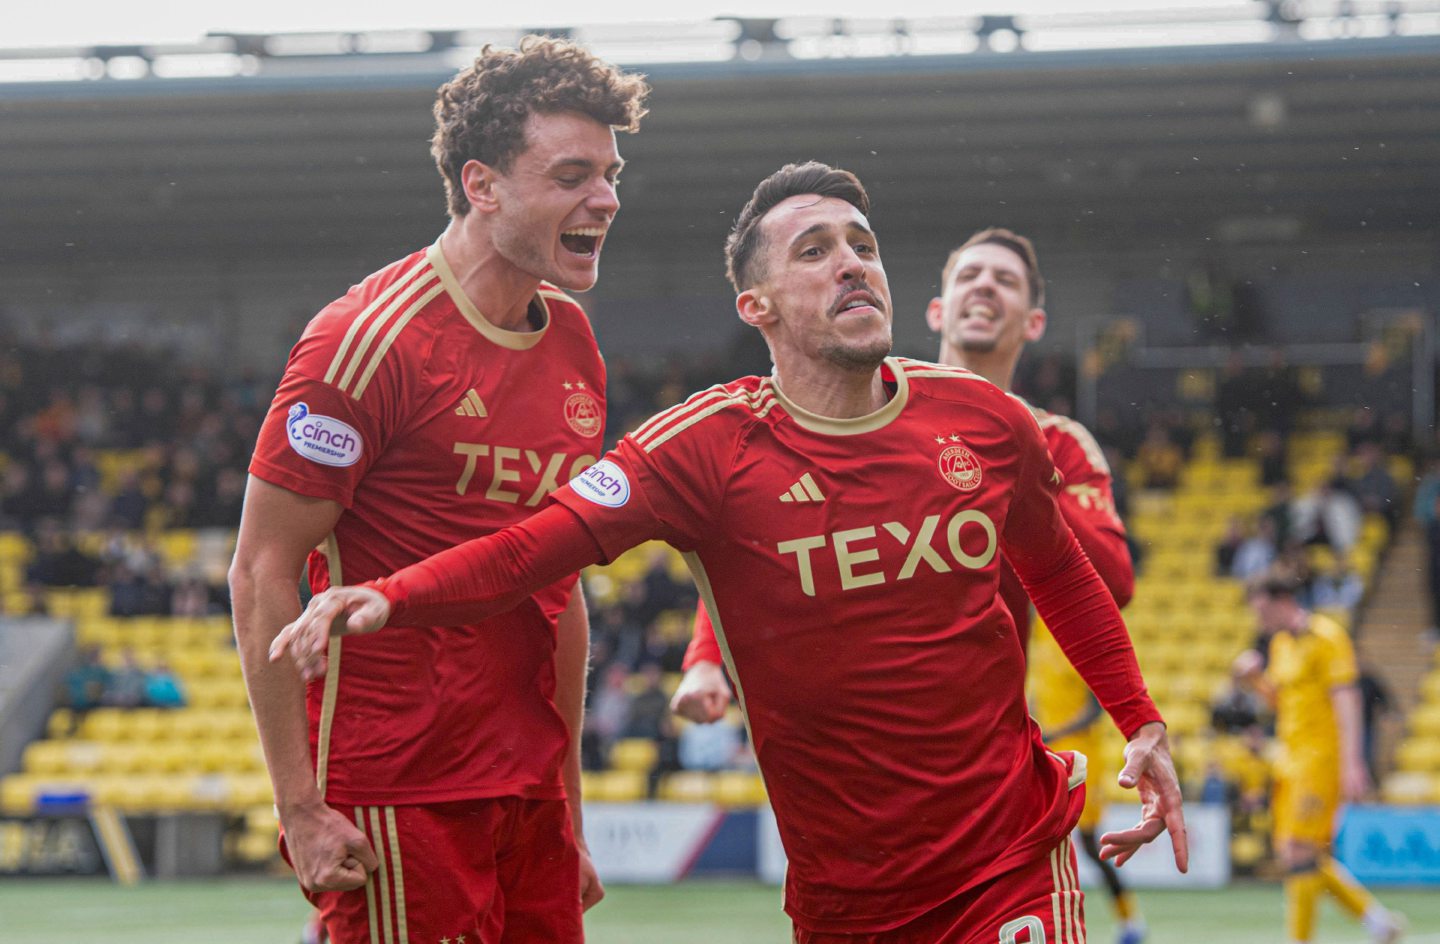 Aberdeen's Bojan Miovski celebrates with Dante Polvara after scoring late on - only for the goal to be disallowed.